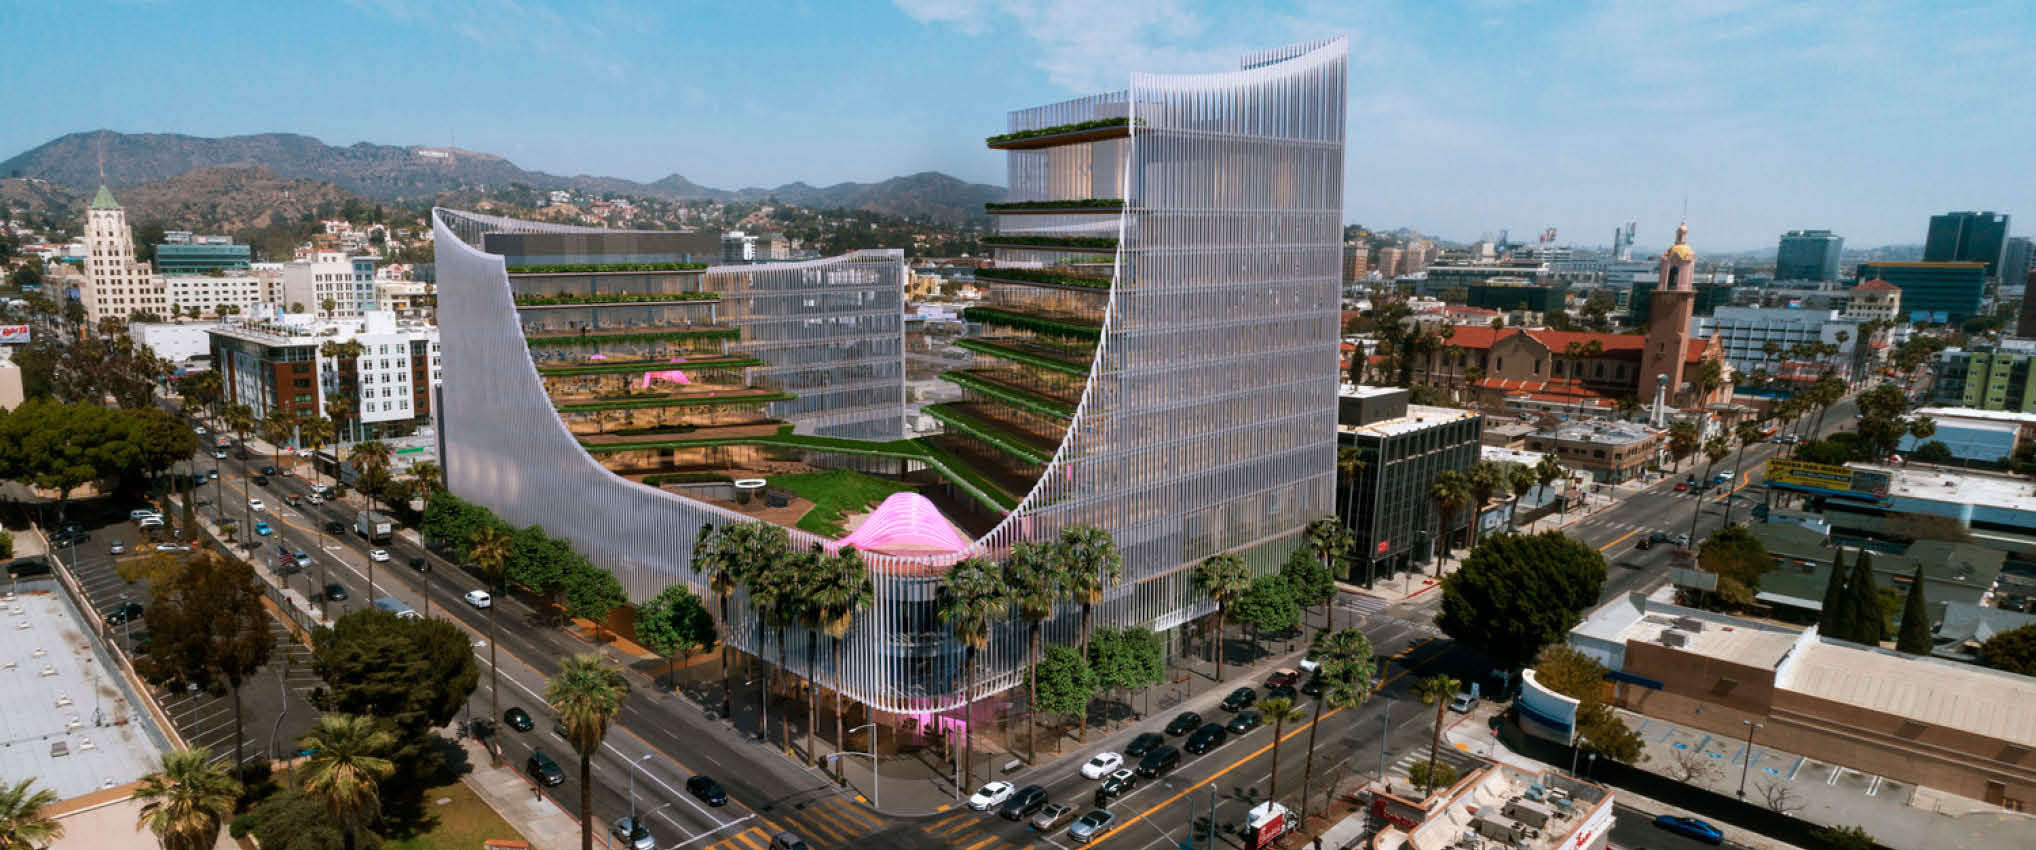 LA Times: HKS Releases Plans for Music Studio Complex for CMNTY Culture in Hollywood